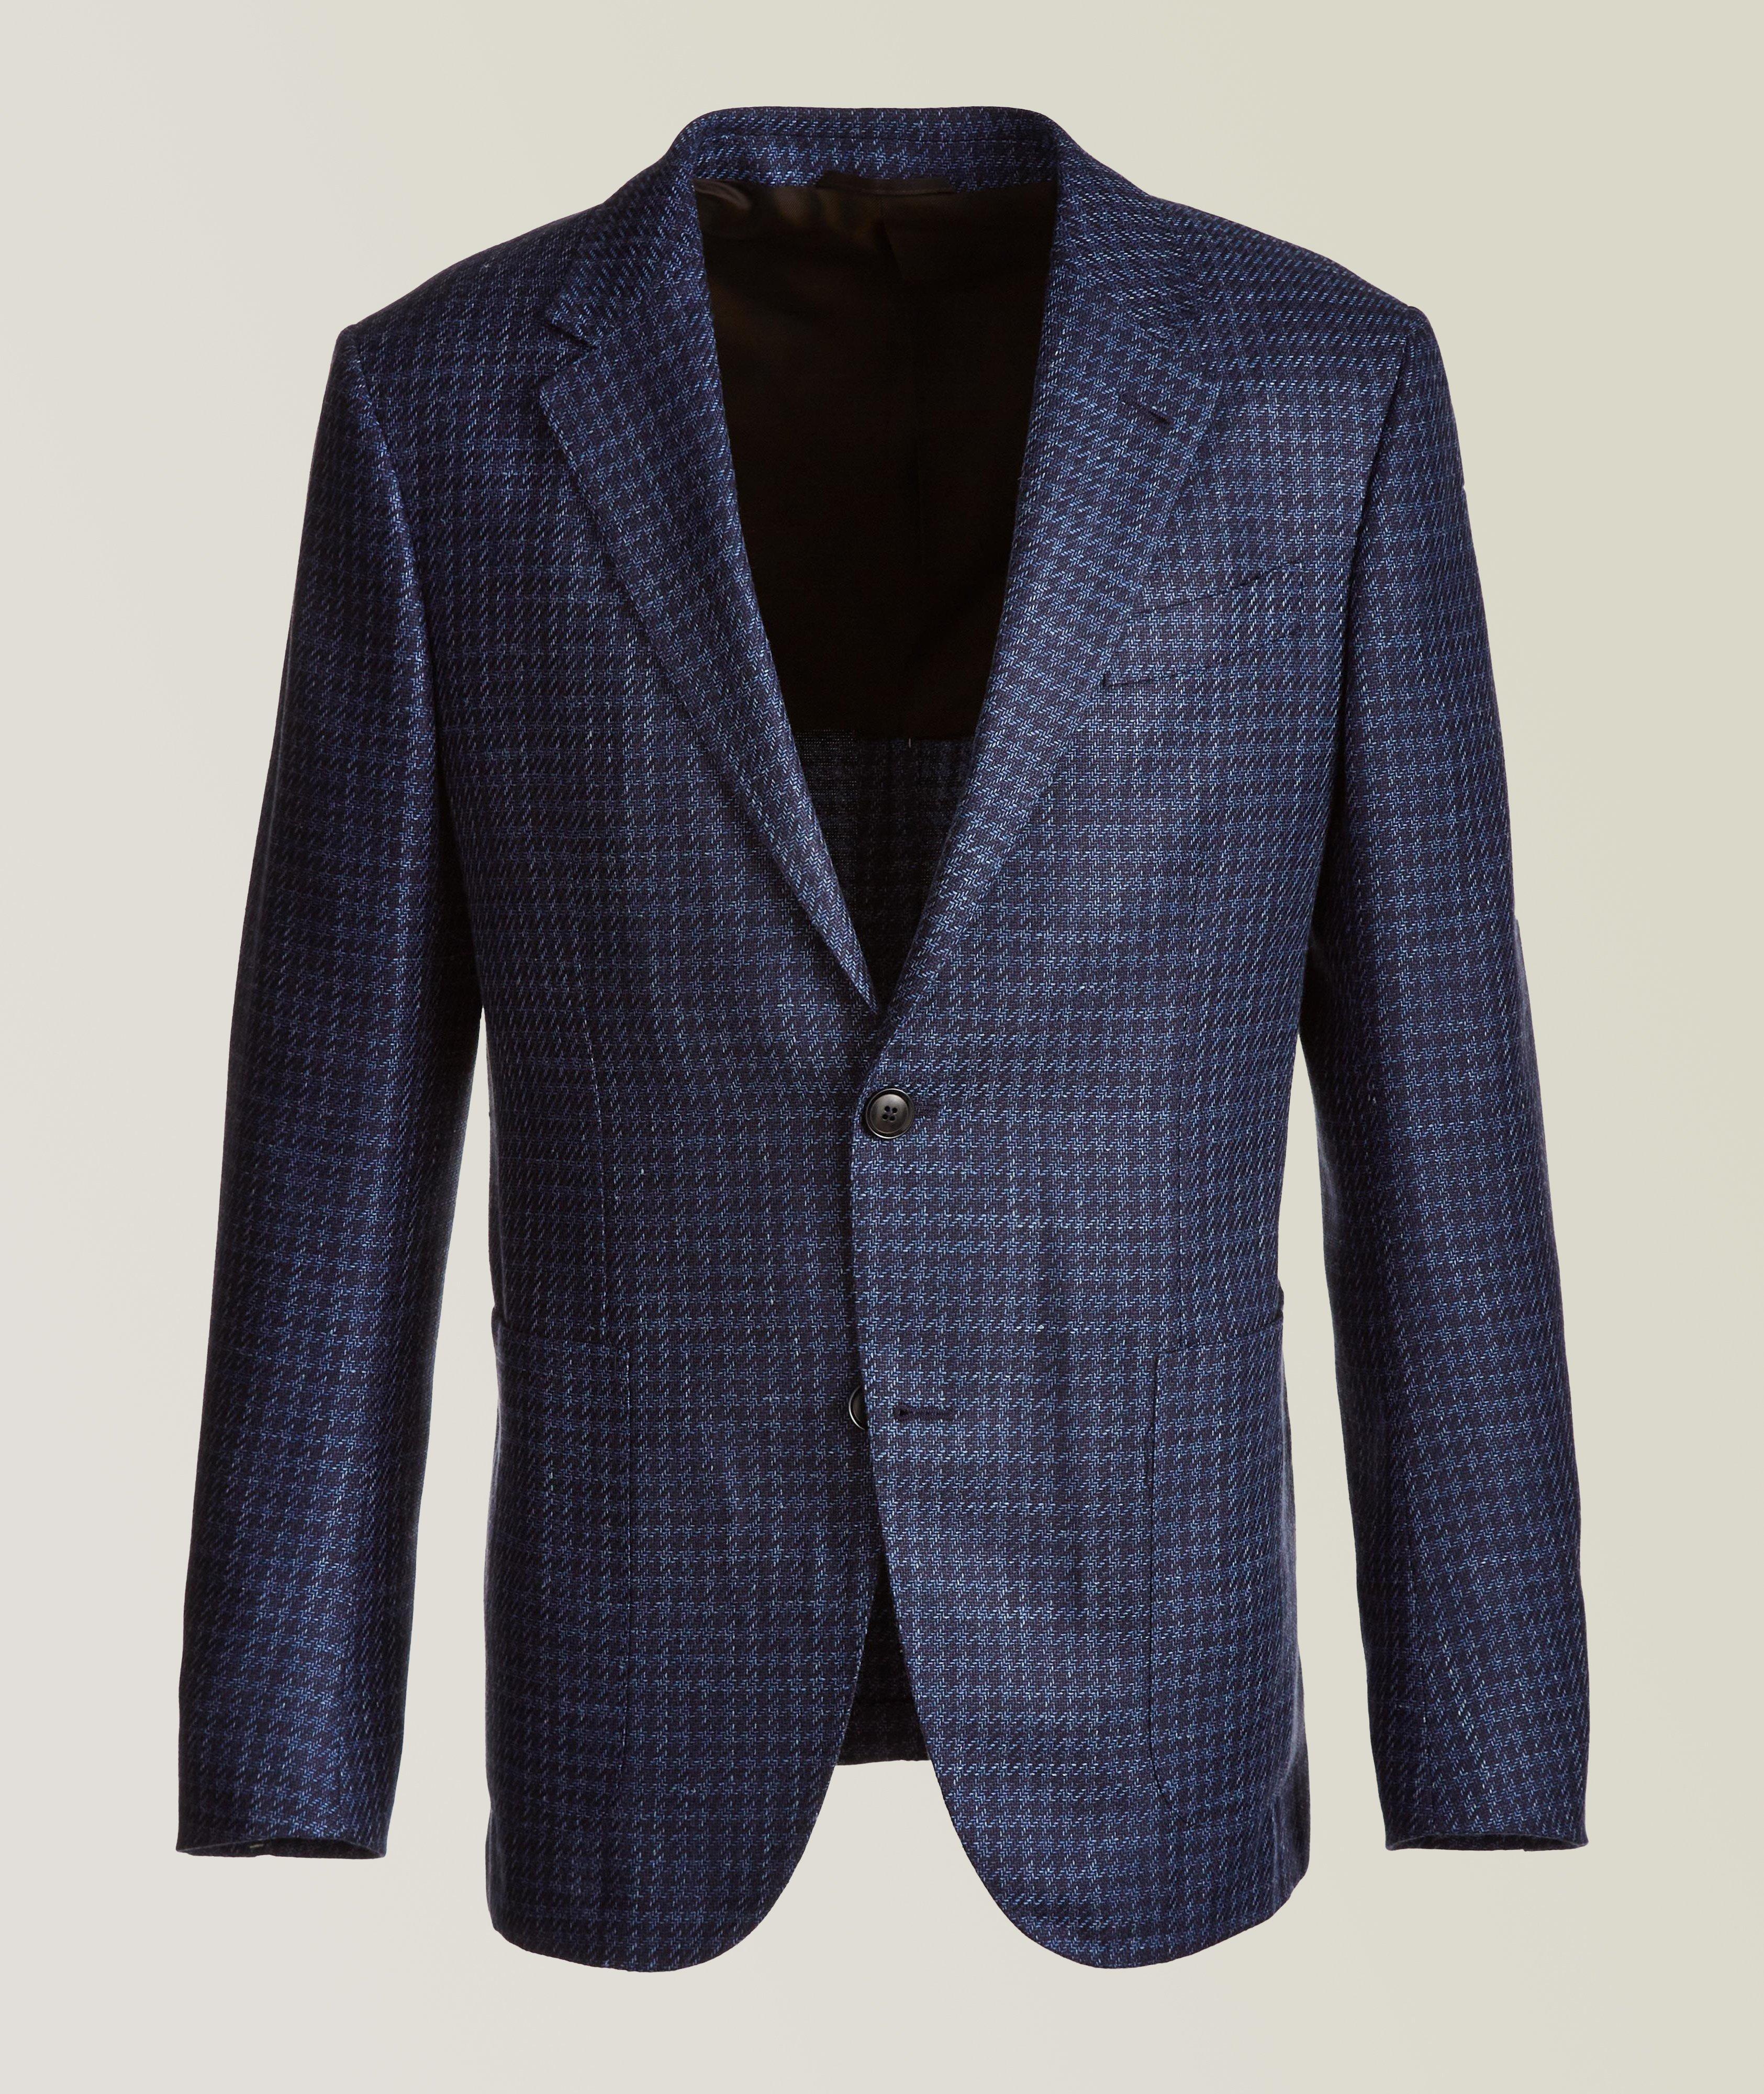 Milano Easy Light  Wool, Silk, and Linen Sports Jacket image 0